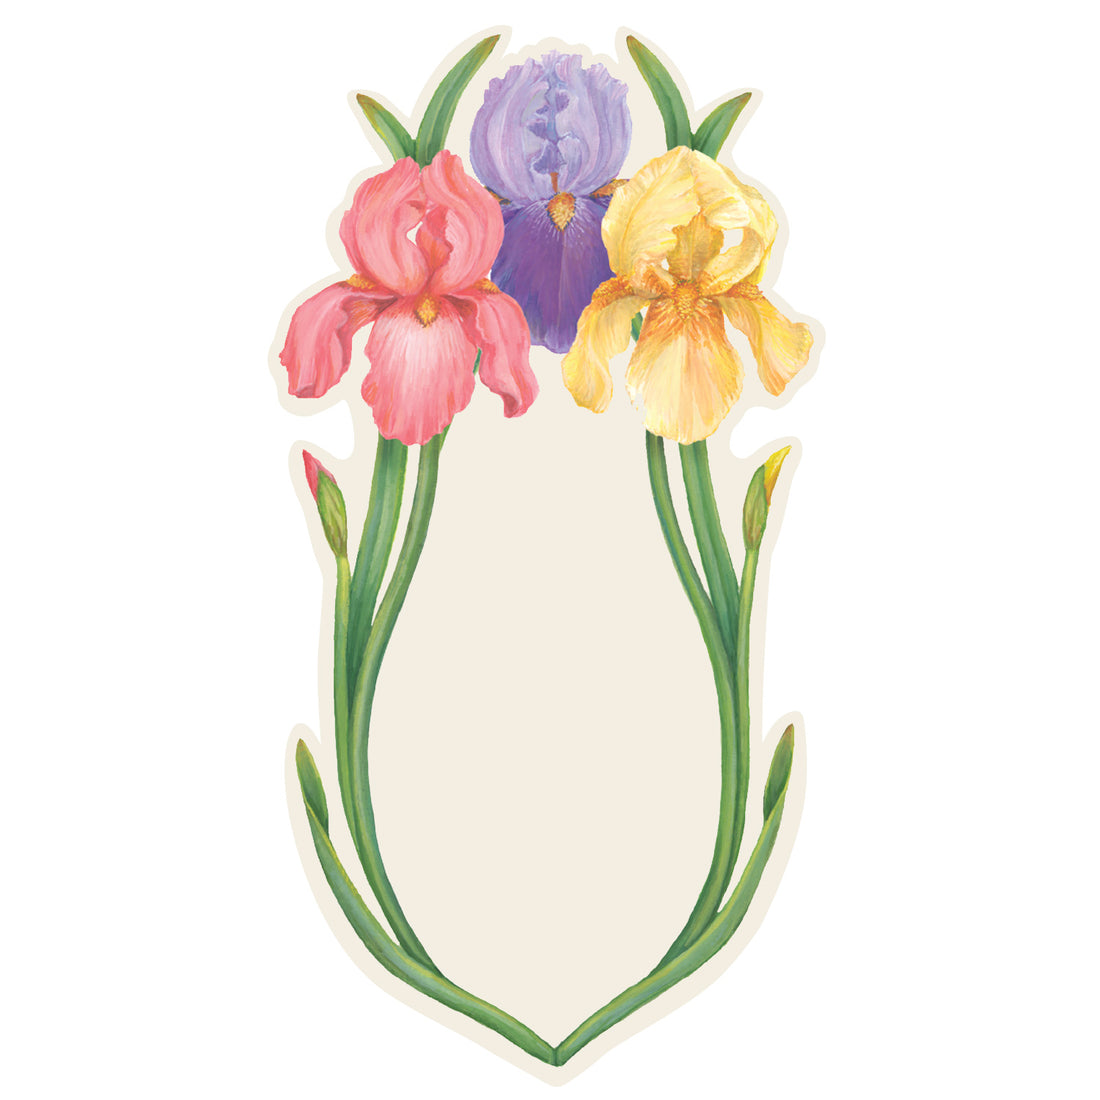 A die-cut card featuring three vibrant iris blooms, one pink, one purple and one yellow adorning the top edge, with slender green stems framing the sides and meeting at the bottom, creating an open white space in the middle for personalization.